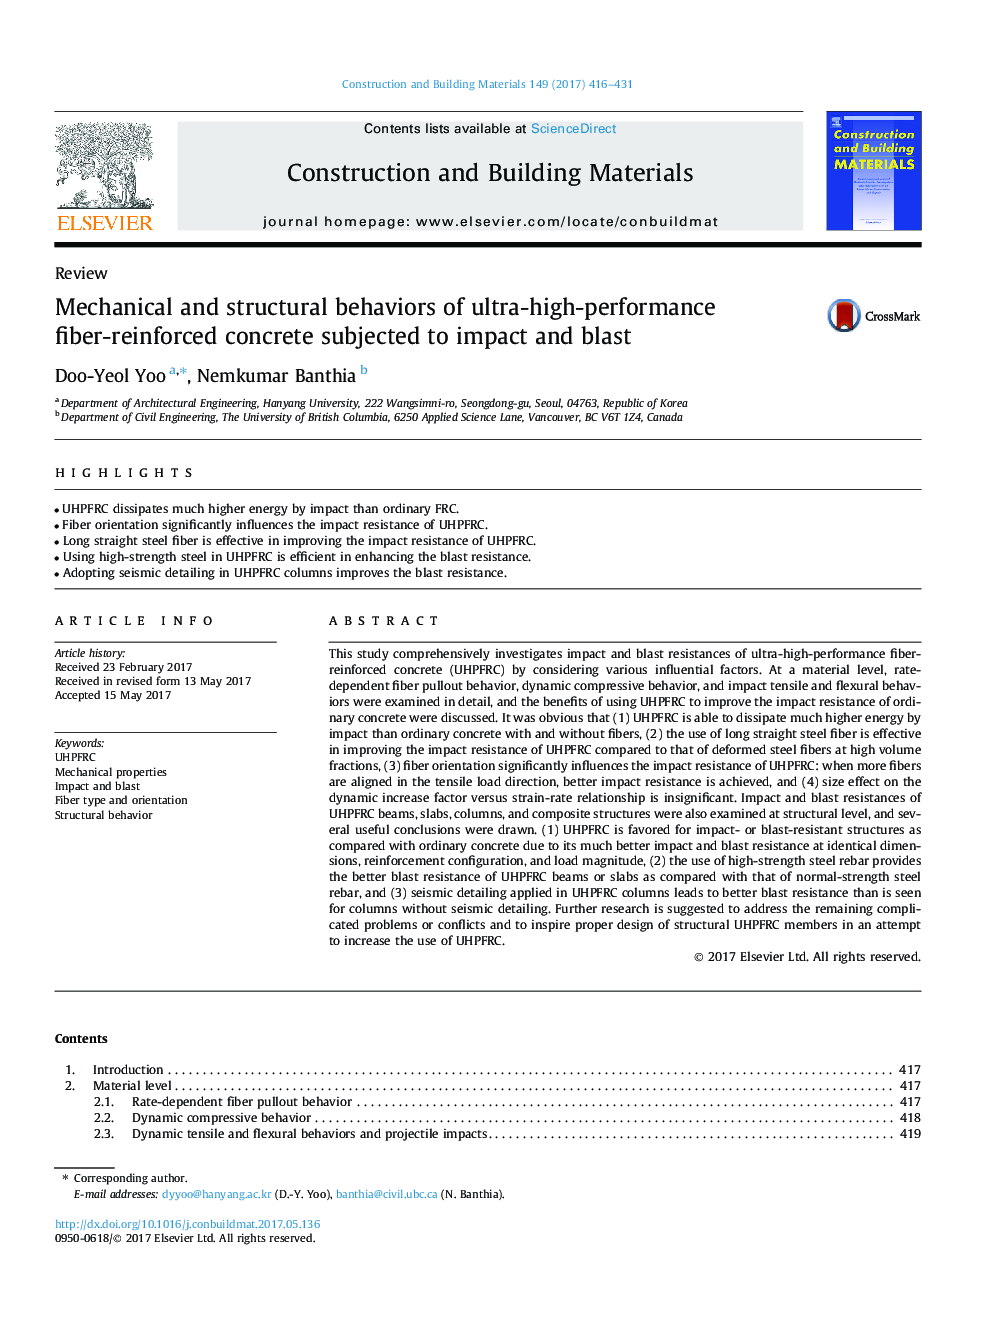 Mechanical and structural behaviors of ultra-high-performance fiber-reinforced concrete subjected to impact and blast